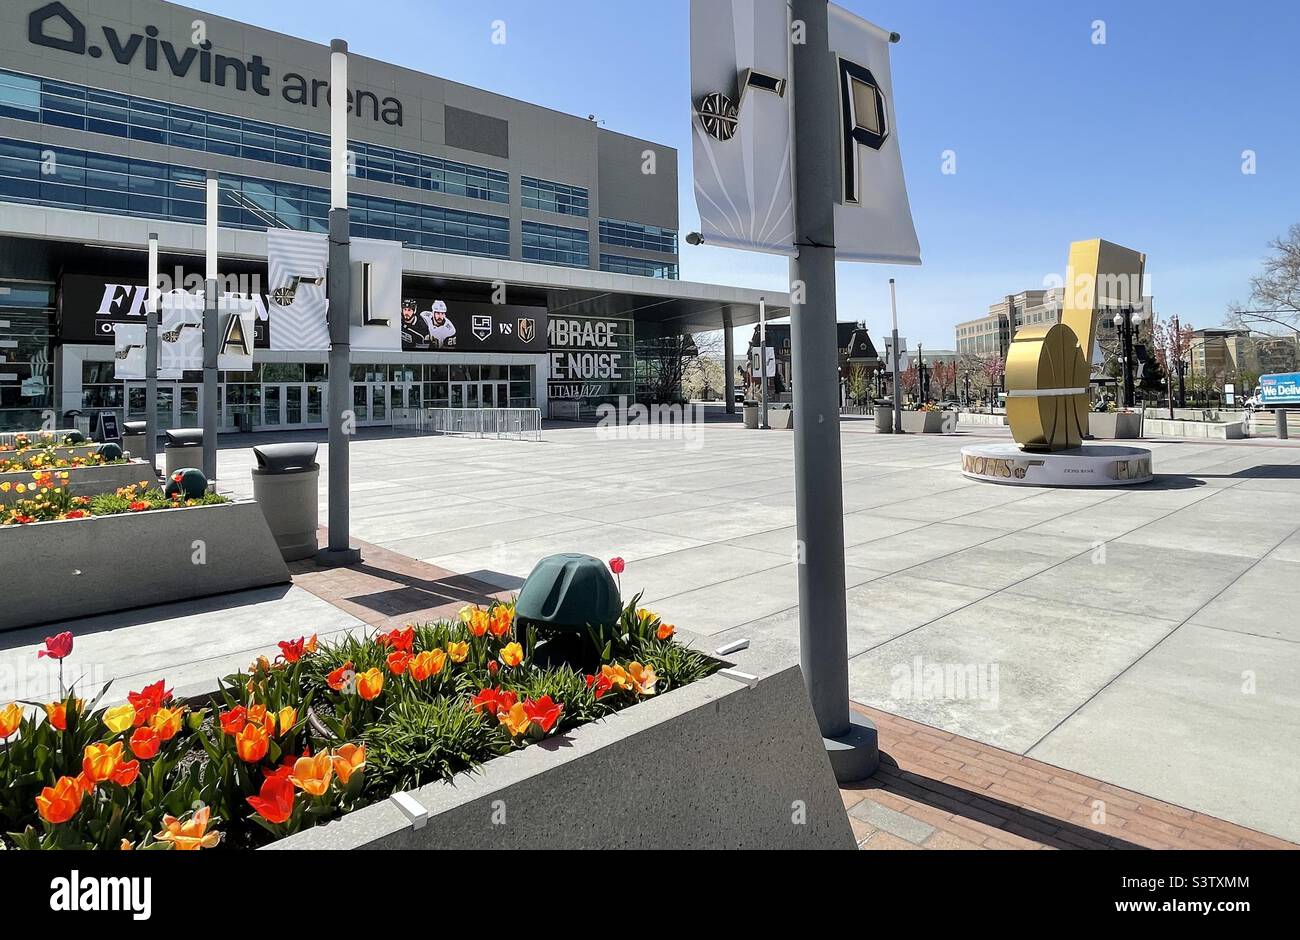 View of the Vivint Sports Arena in Salt Lake City, Utah, USA, the home of the NBA basketball team, the Utah Jazz. Here, the open plaza in front is seen in springtime. Stock Photo